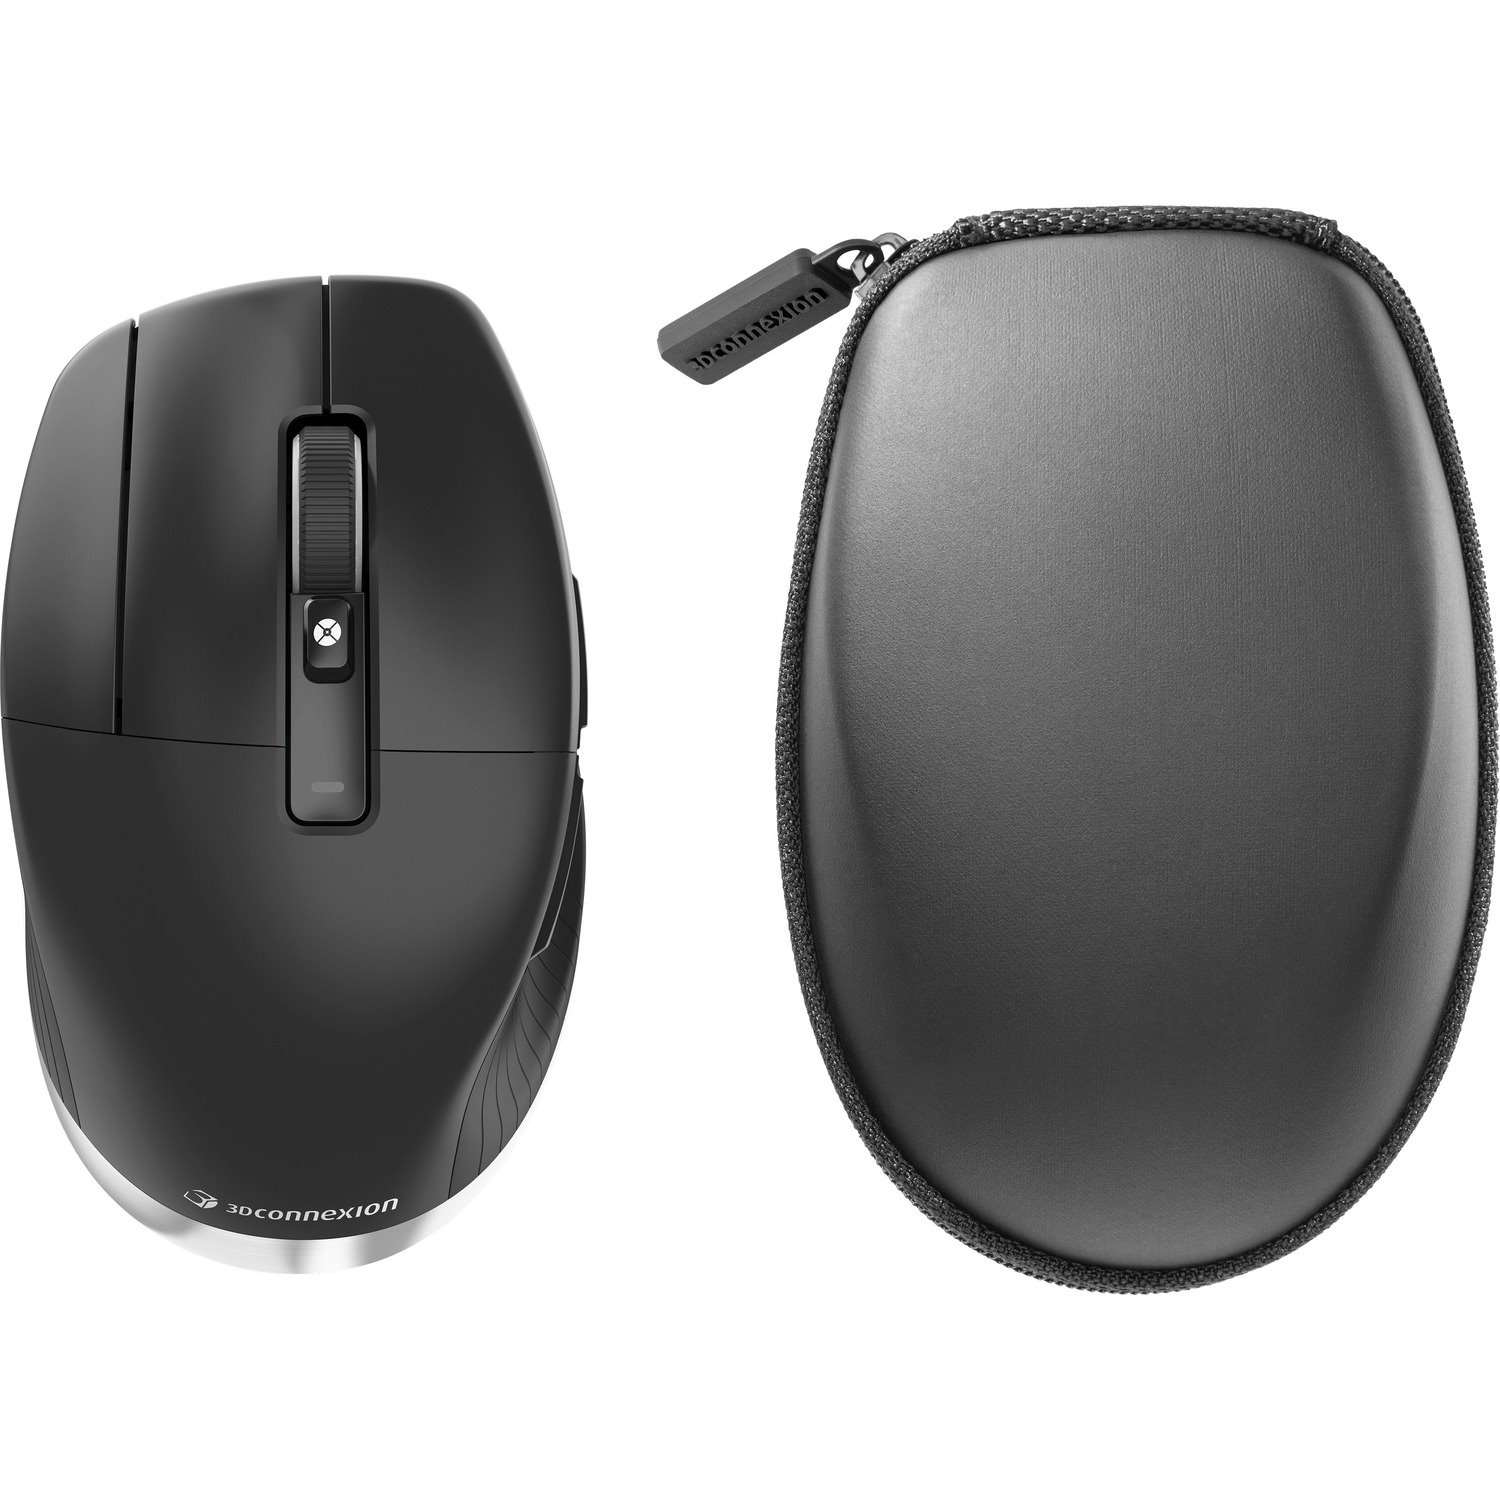 3Dconnexion CadMouse Pro Mouse - Bluetooth/Radio Frequency - USB - Optical - 7 Button(s) - 5 Programmable Button(s)